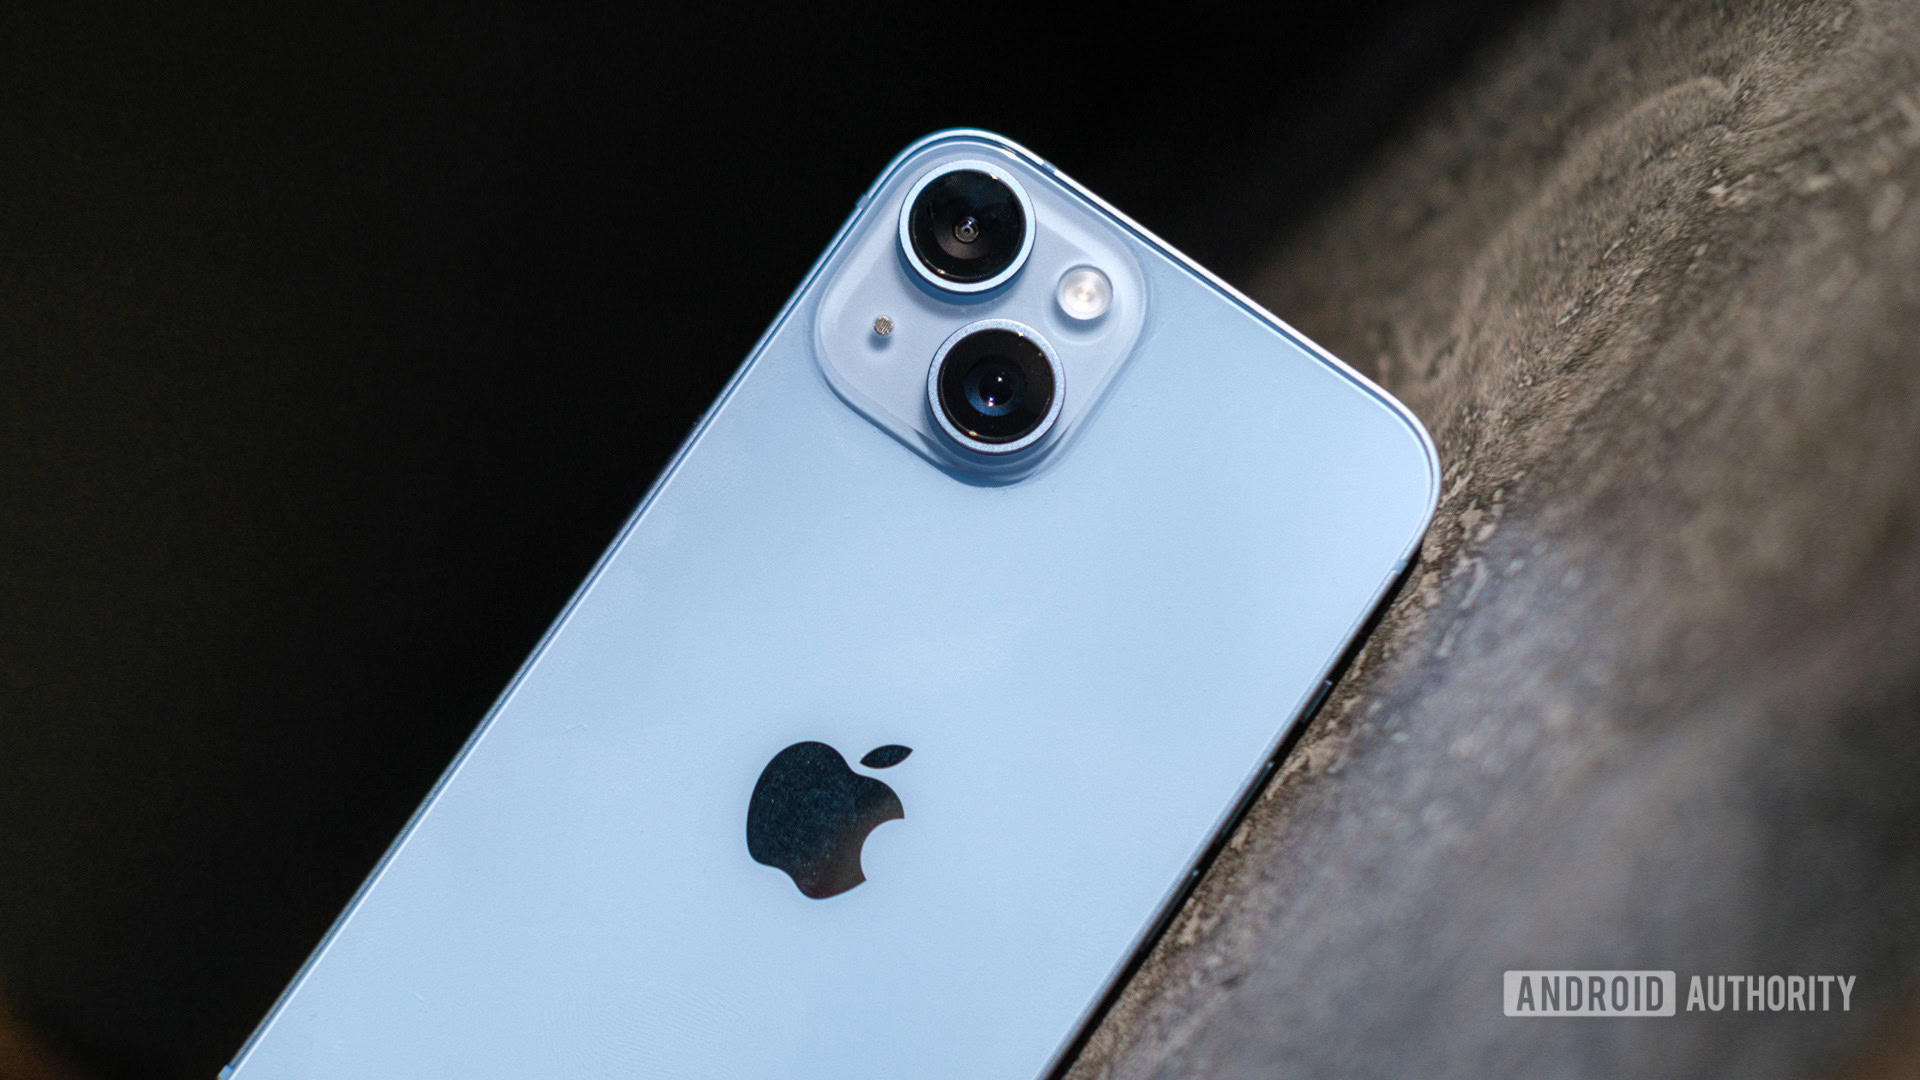 Apple iPhone 14 Pro Max review: An upgrade worth considering